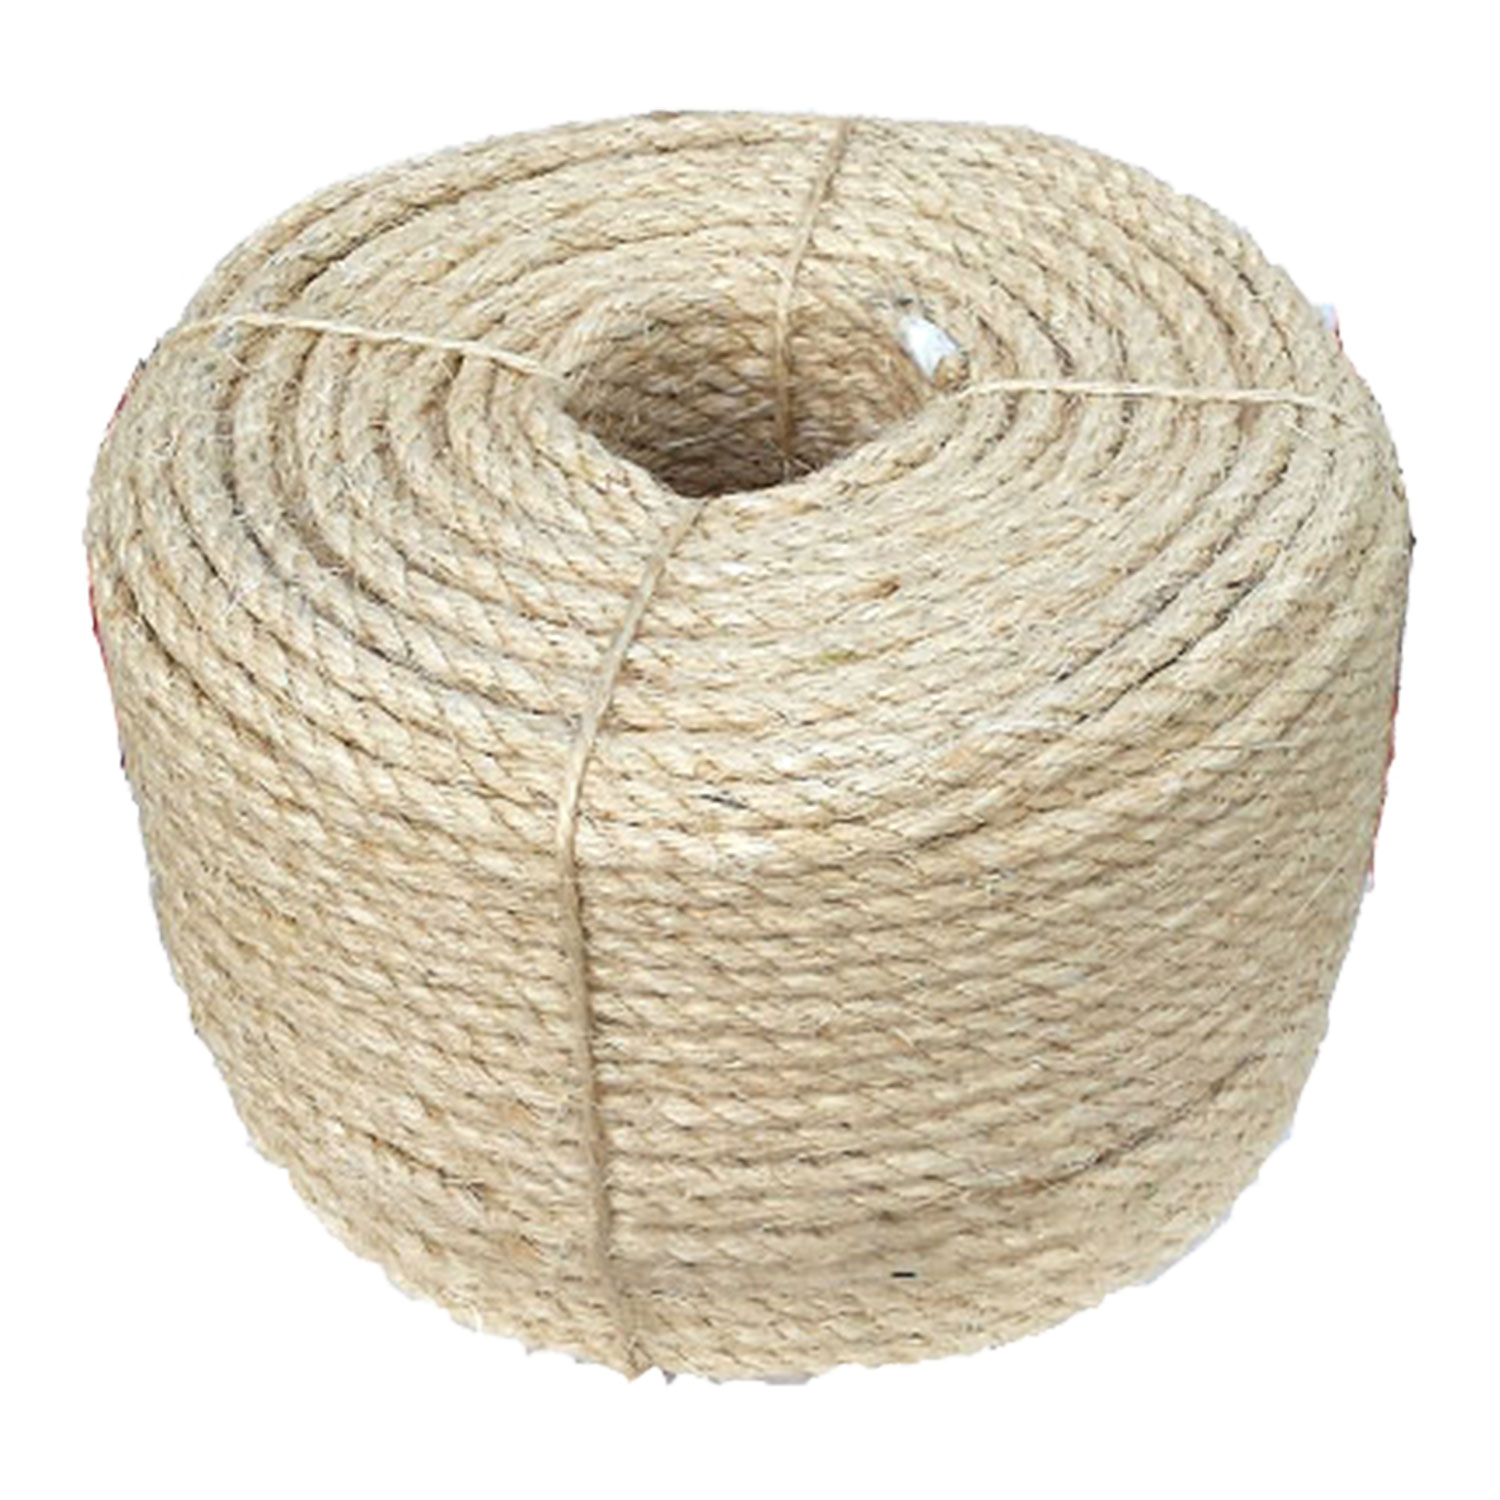 ZHWNGXOlian Diameter 6mm Gold Rope Light Resistance Size:3.5mm 50M Anodized Aluminum Material Waste Paper Binding and Packaging Rope Corrosion Resistance and Aging 20/50/100M 